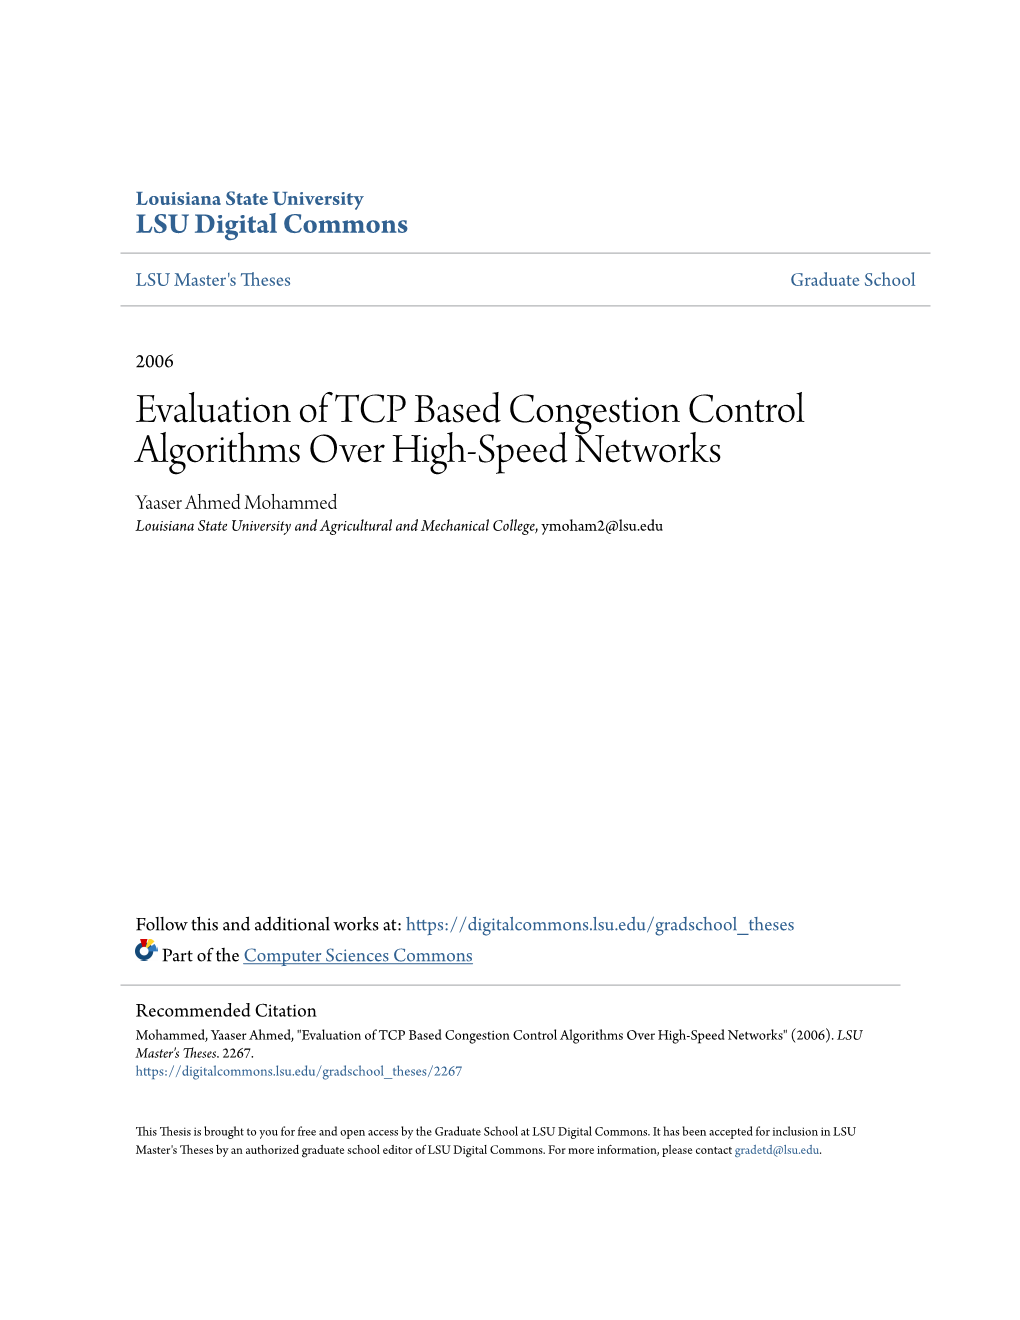 Evaluation of TCP Based Congestion Control Algorithms Over High